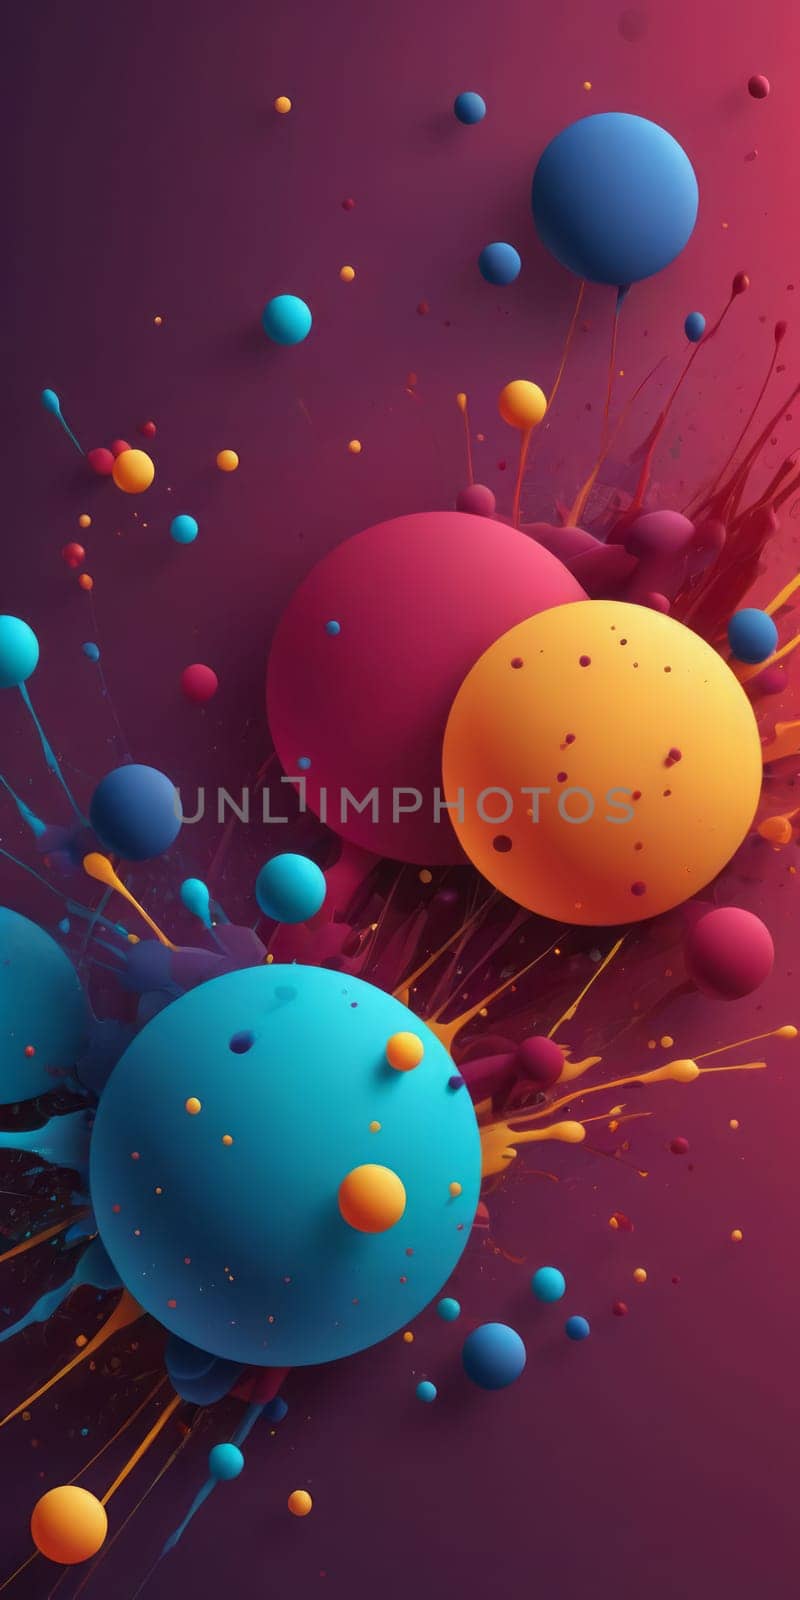 Splattered Shapes in Maroon and Blue by nkotlyar